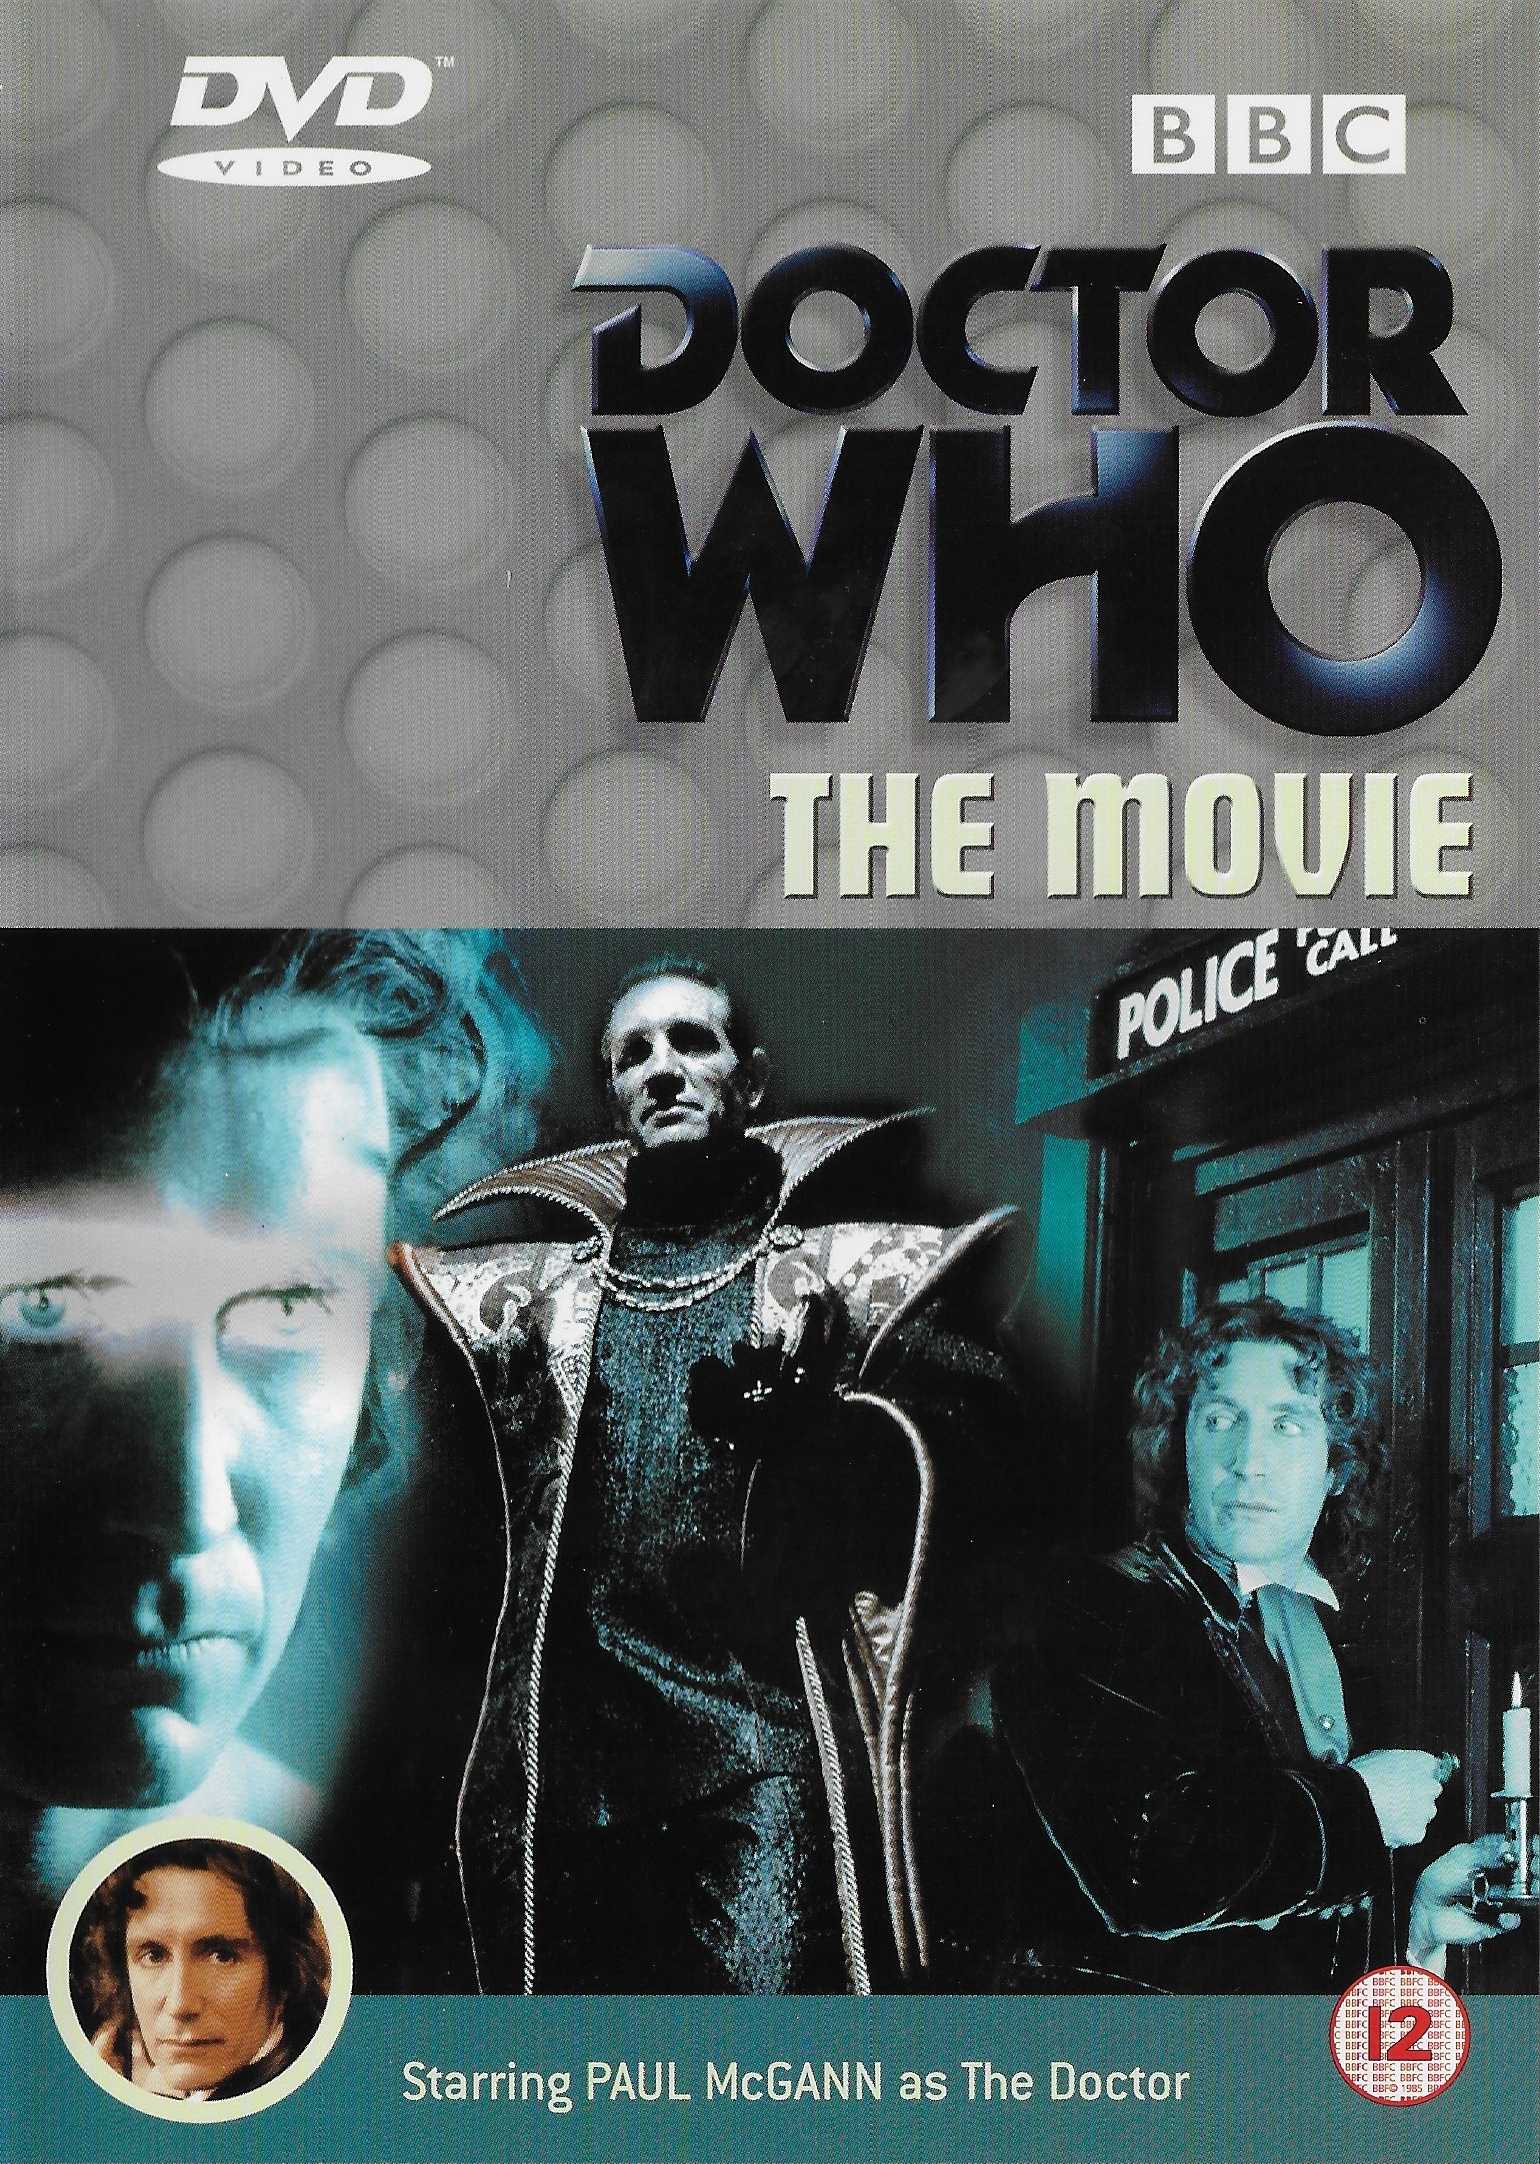 Picture of BBCDVD 1043 Doctor Who - The movie by artist Matthew Jacobs from the BBC dvds - Records and Tapes library